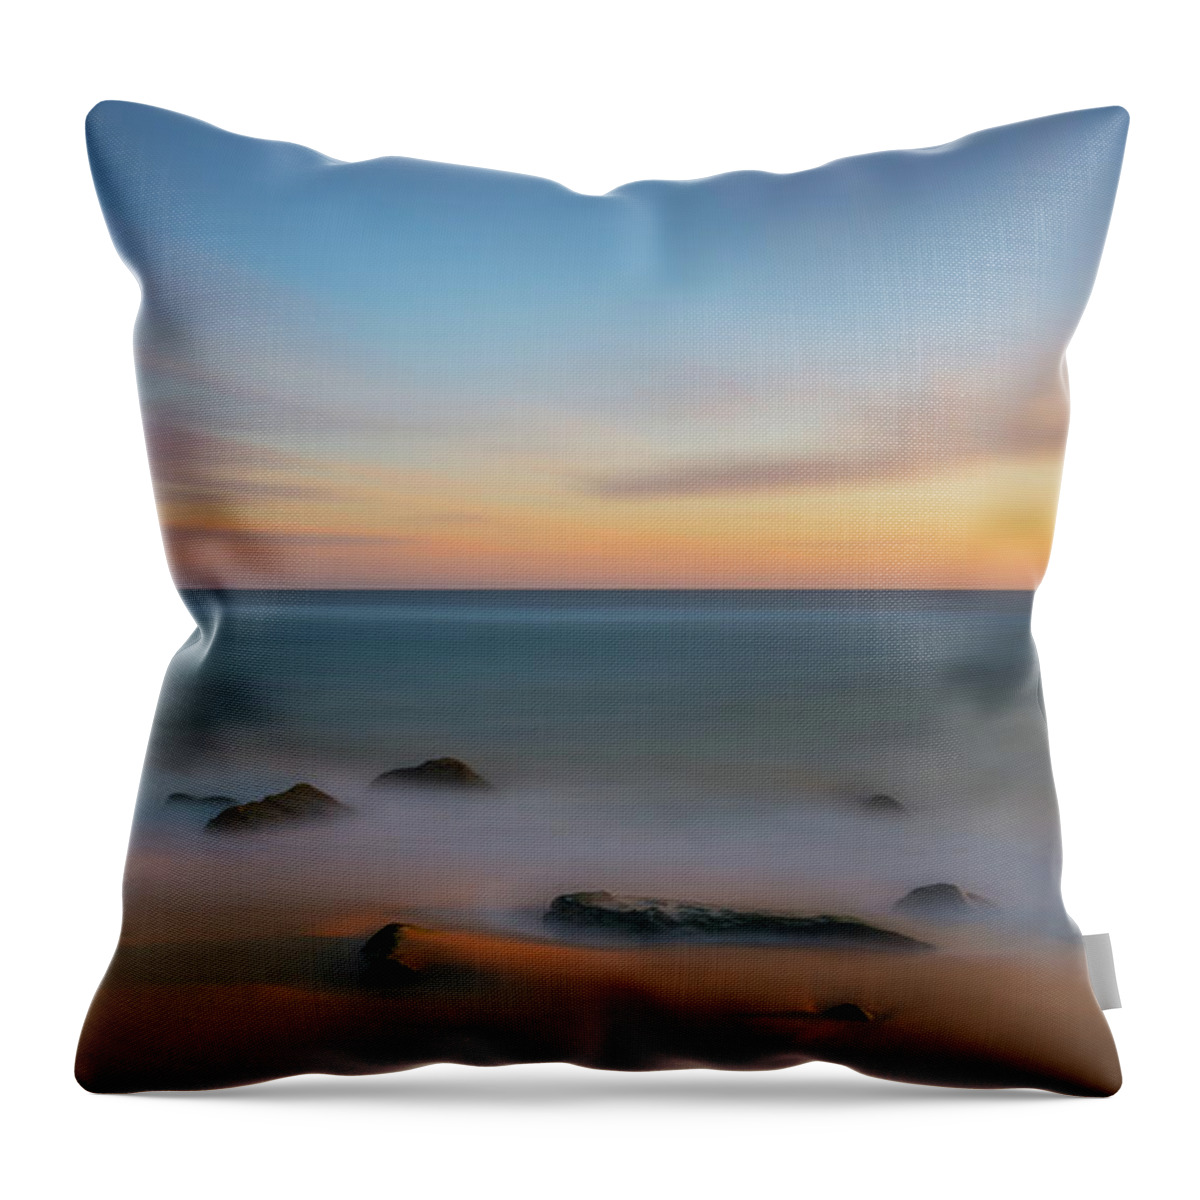 Sunrise Throw Pillow featuring the photograph Dawn by Michael Ver Sprill